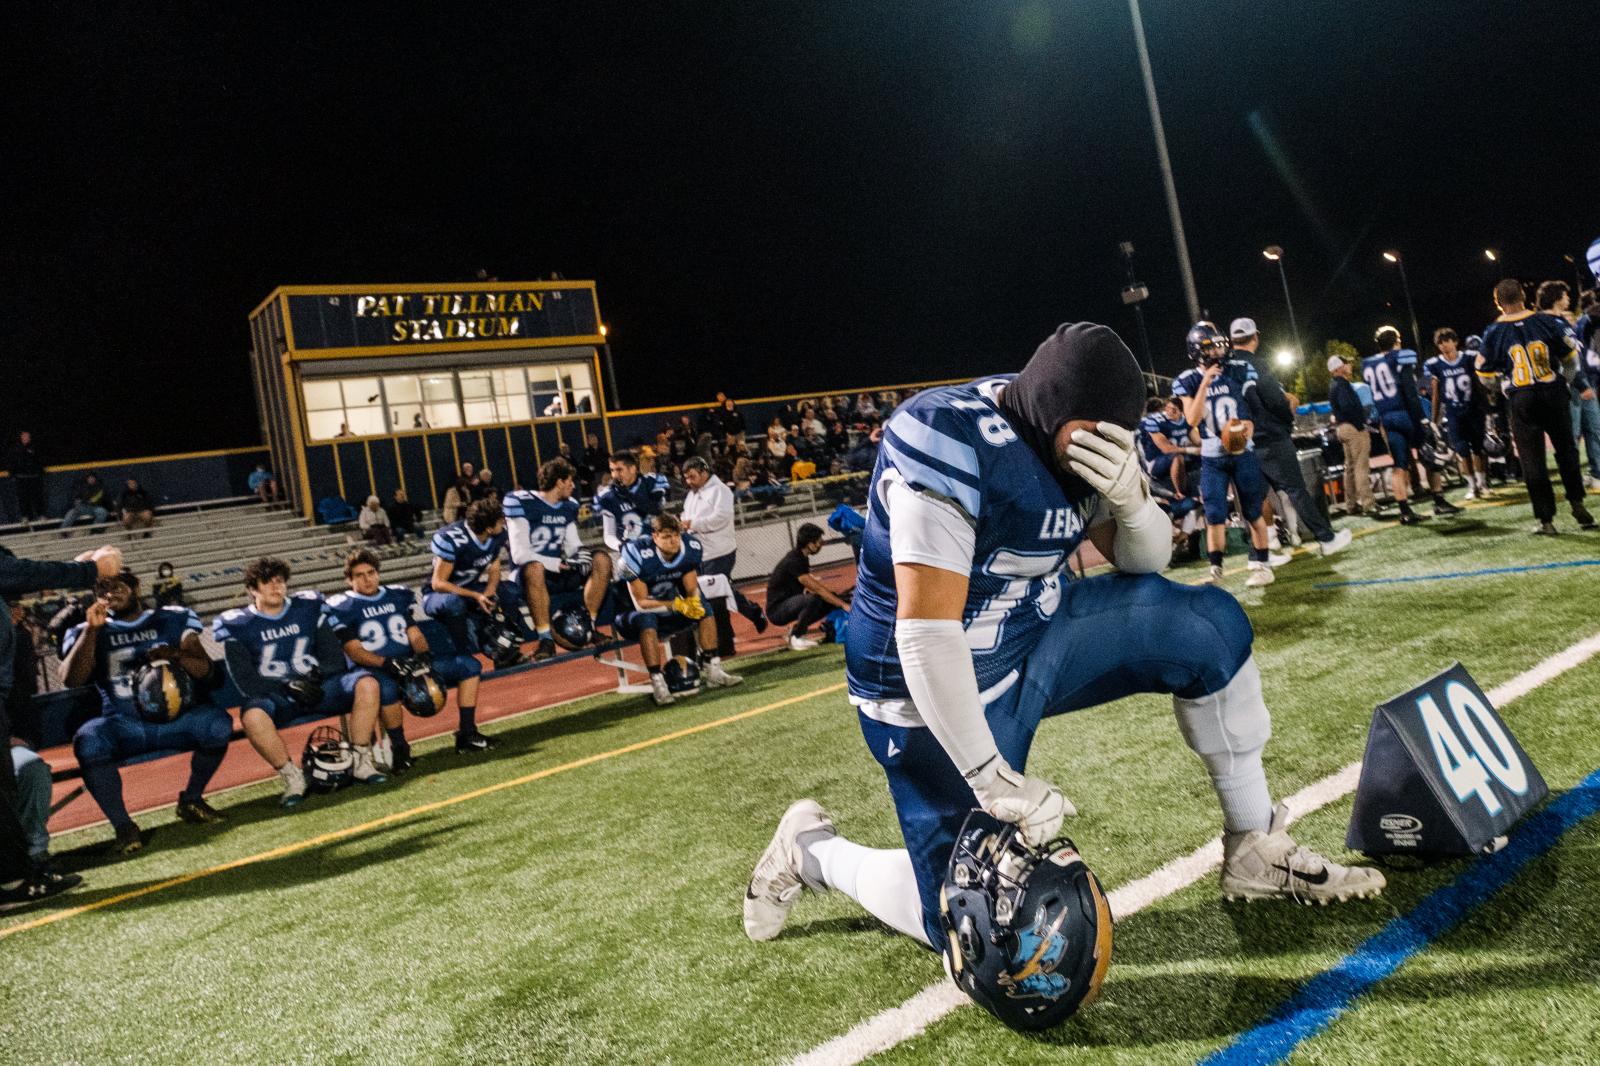 Image from SPORTS - A Leland High School football player pauses before the...